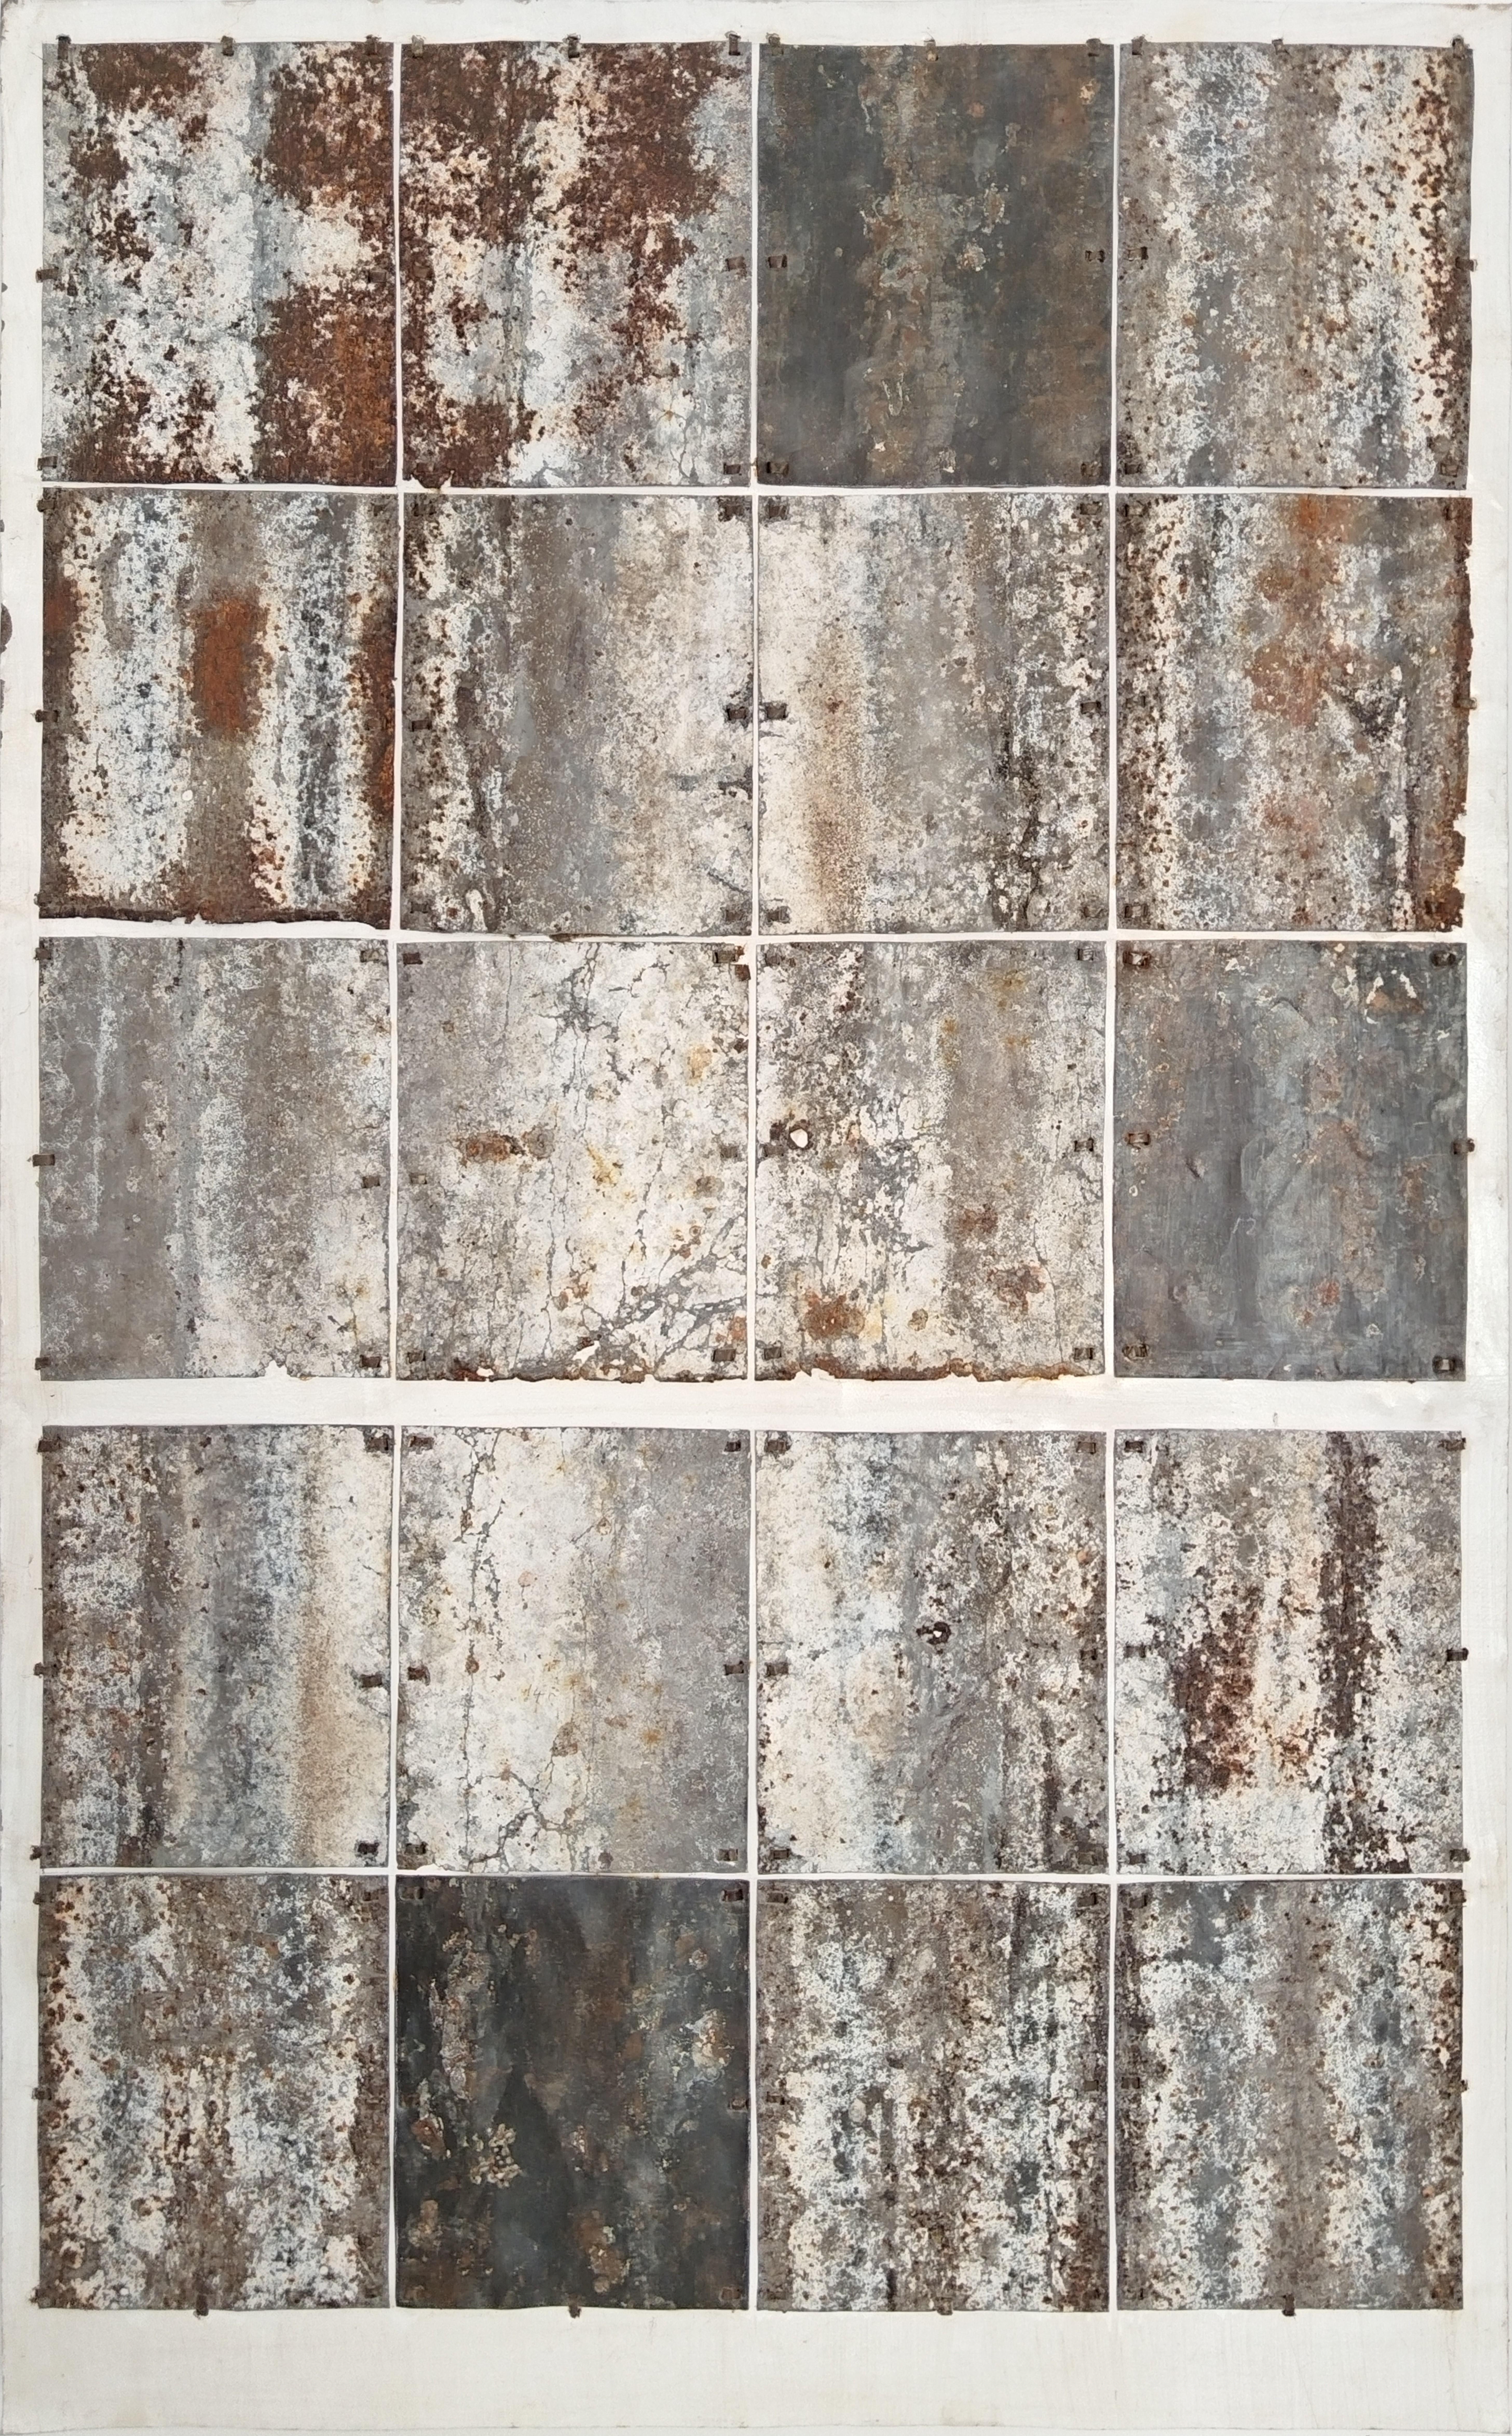 Mark Hilltout Still-Life Painting - Unique Rusted Metal Composition "Window on the Wall"